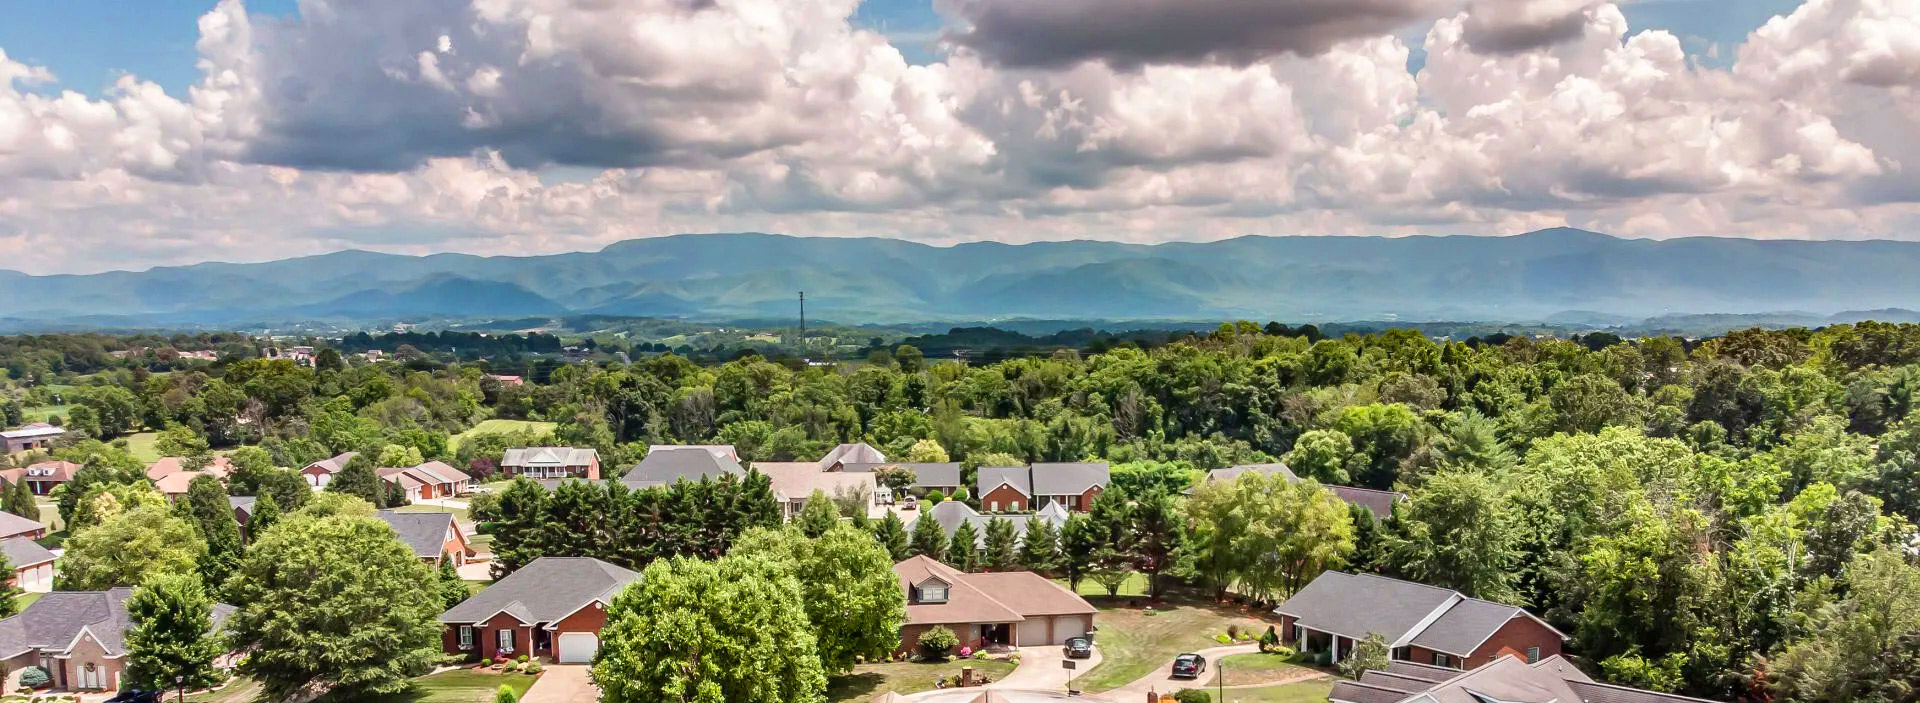 View of Greene Mountain and Viking Mountain seen from a drone hovering over a Greeneville Tennessee subdivision with large homes with swimming pools